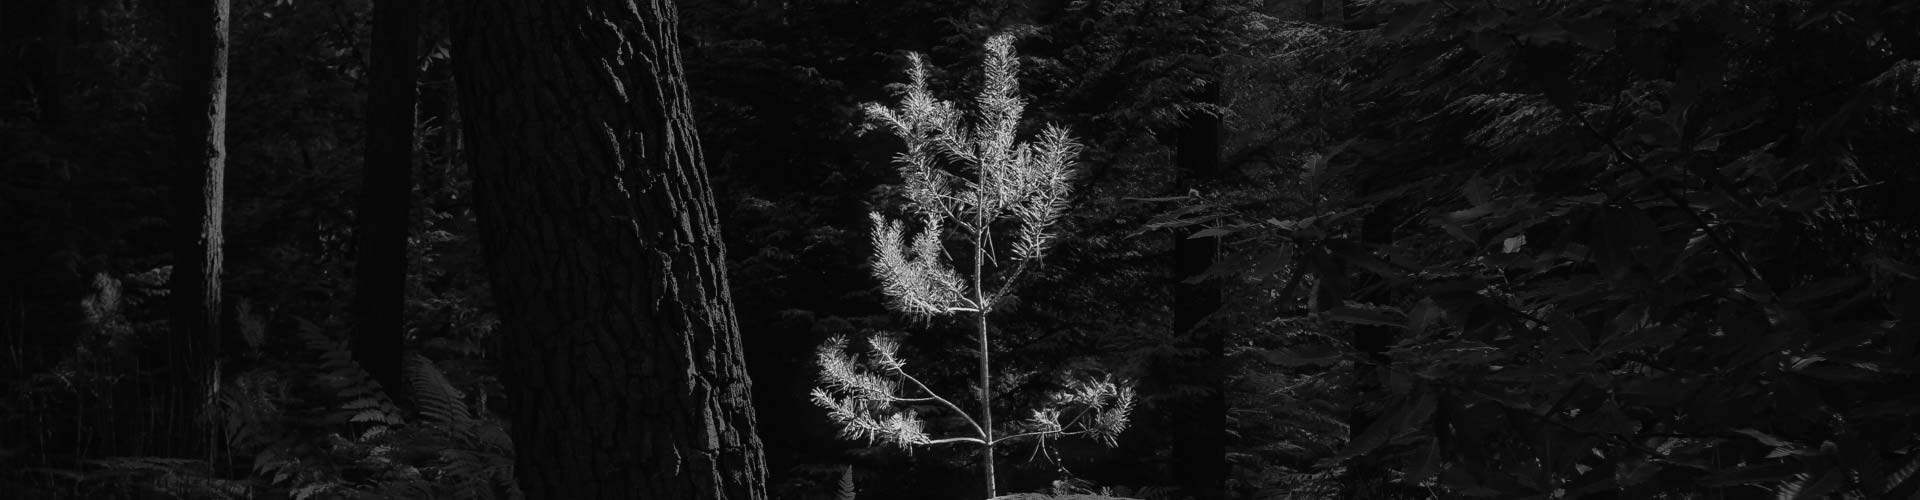 Silverwoods Banners Greyscale Forest 2